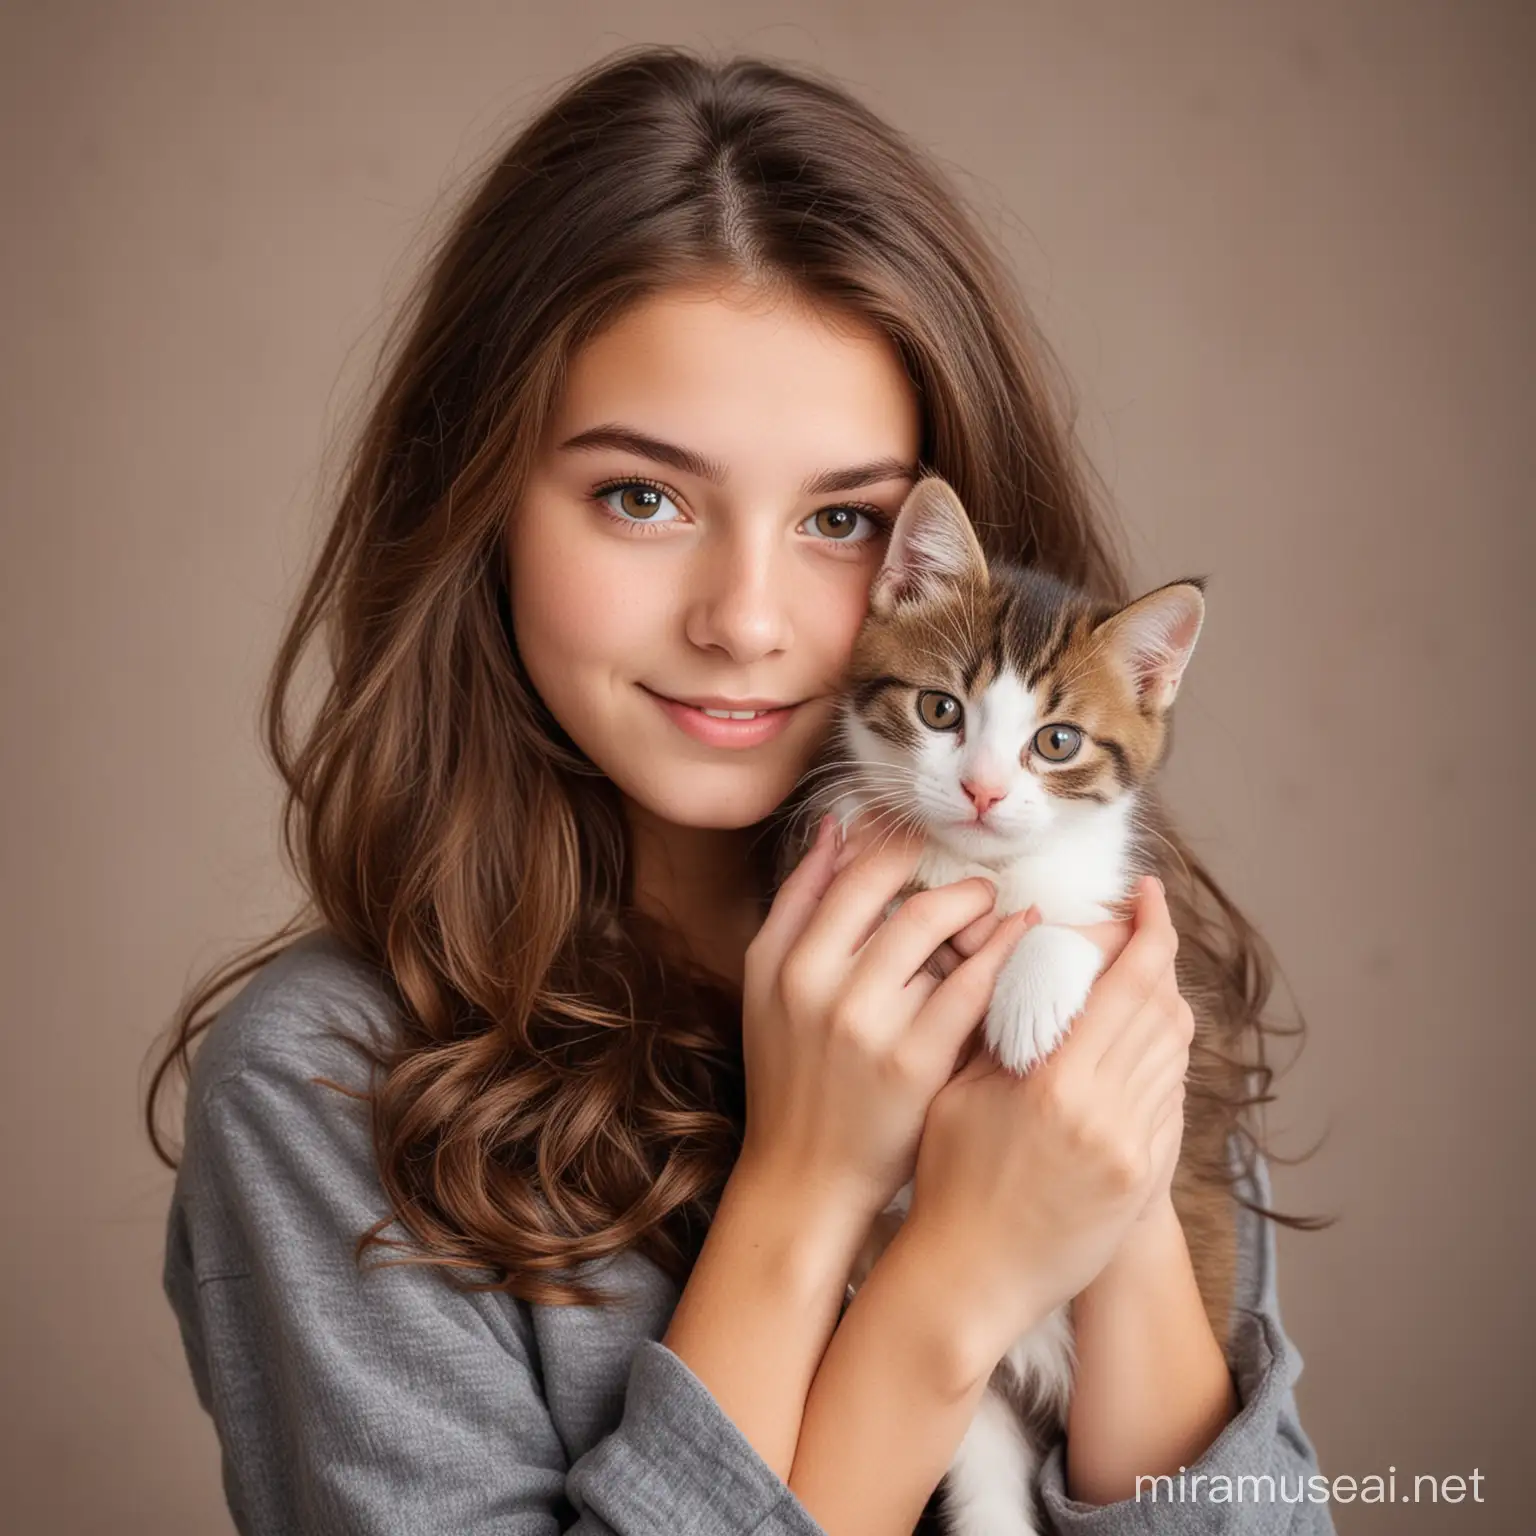 cute teen age girl with brown hair holding a kitten